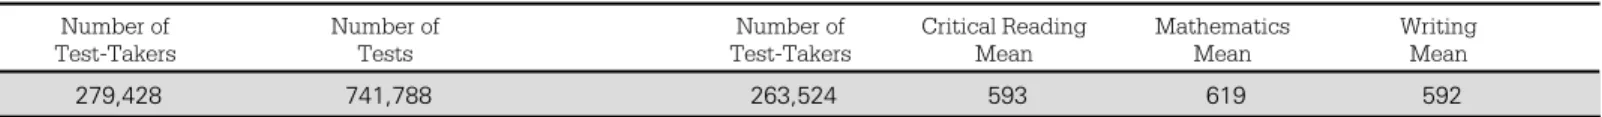 Table 20: Number of Test-Takers and Tests for SAT Subject Tests